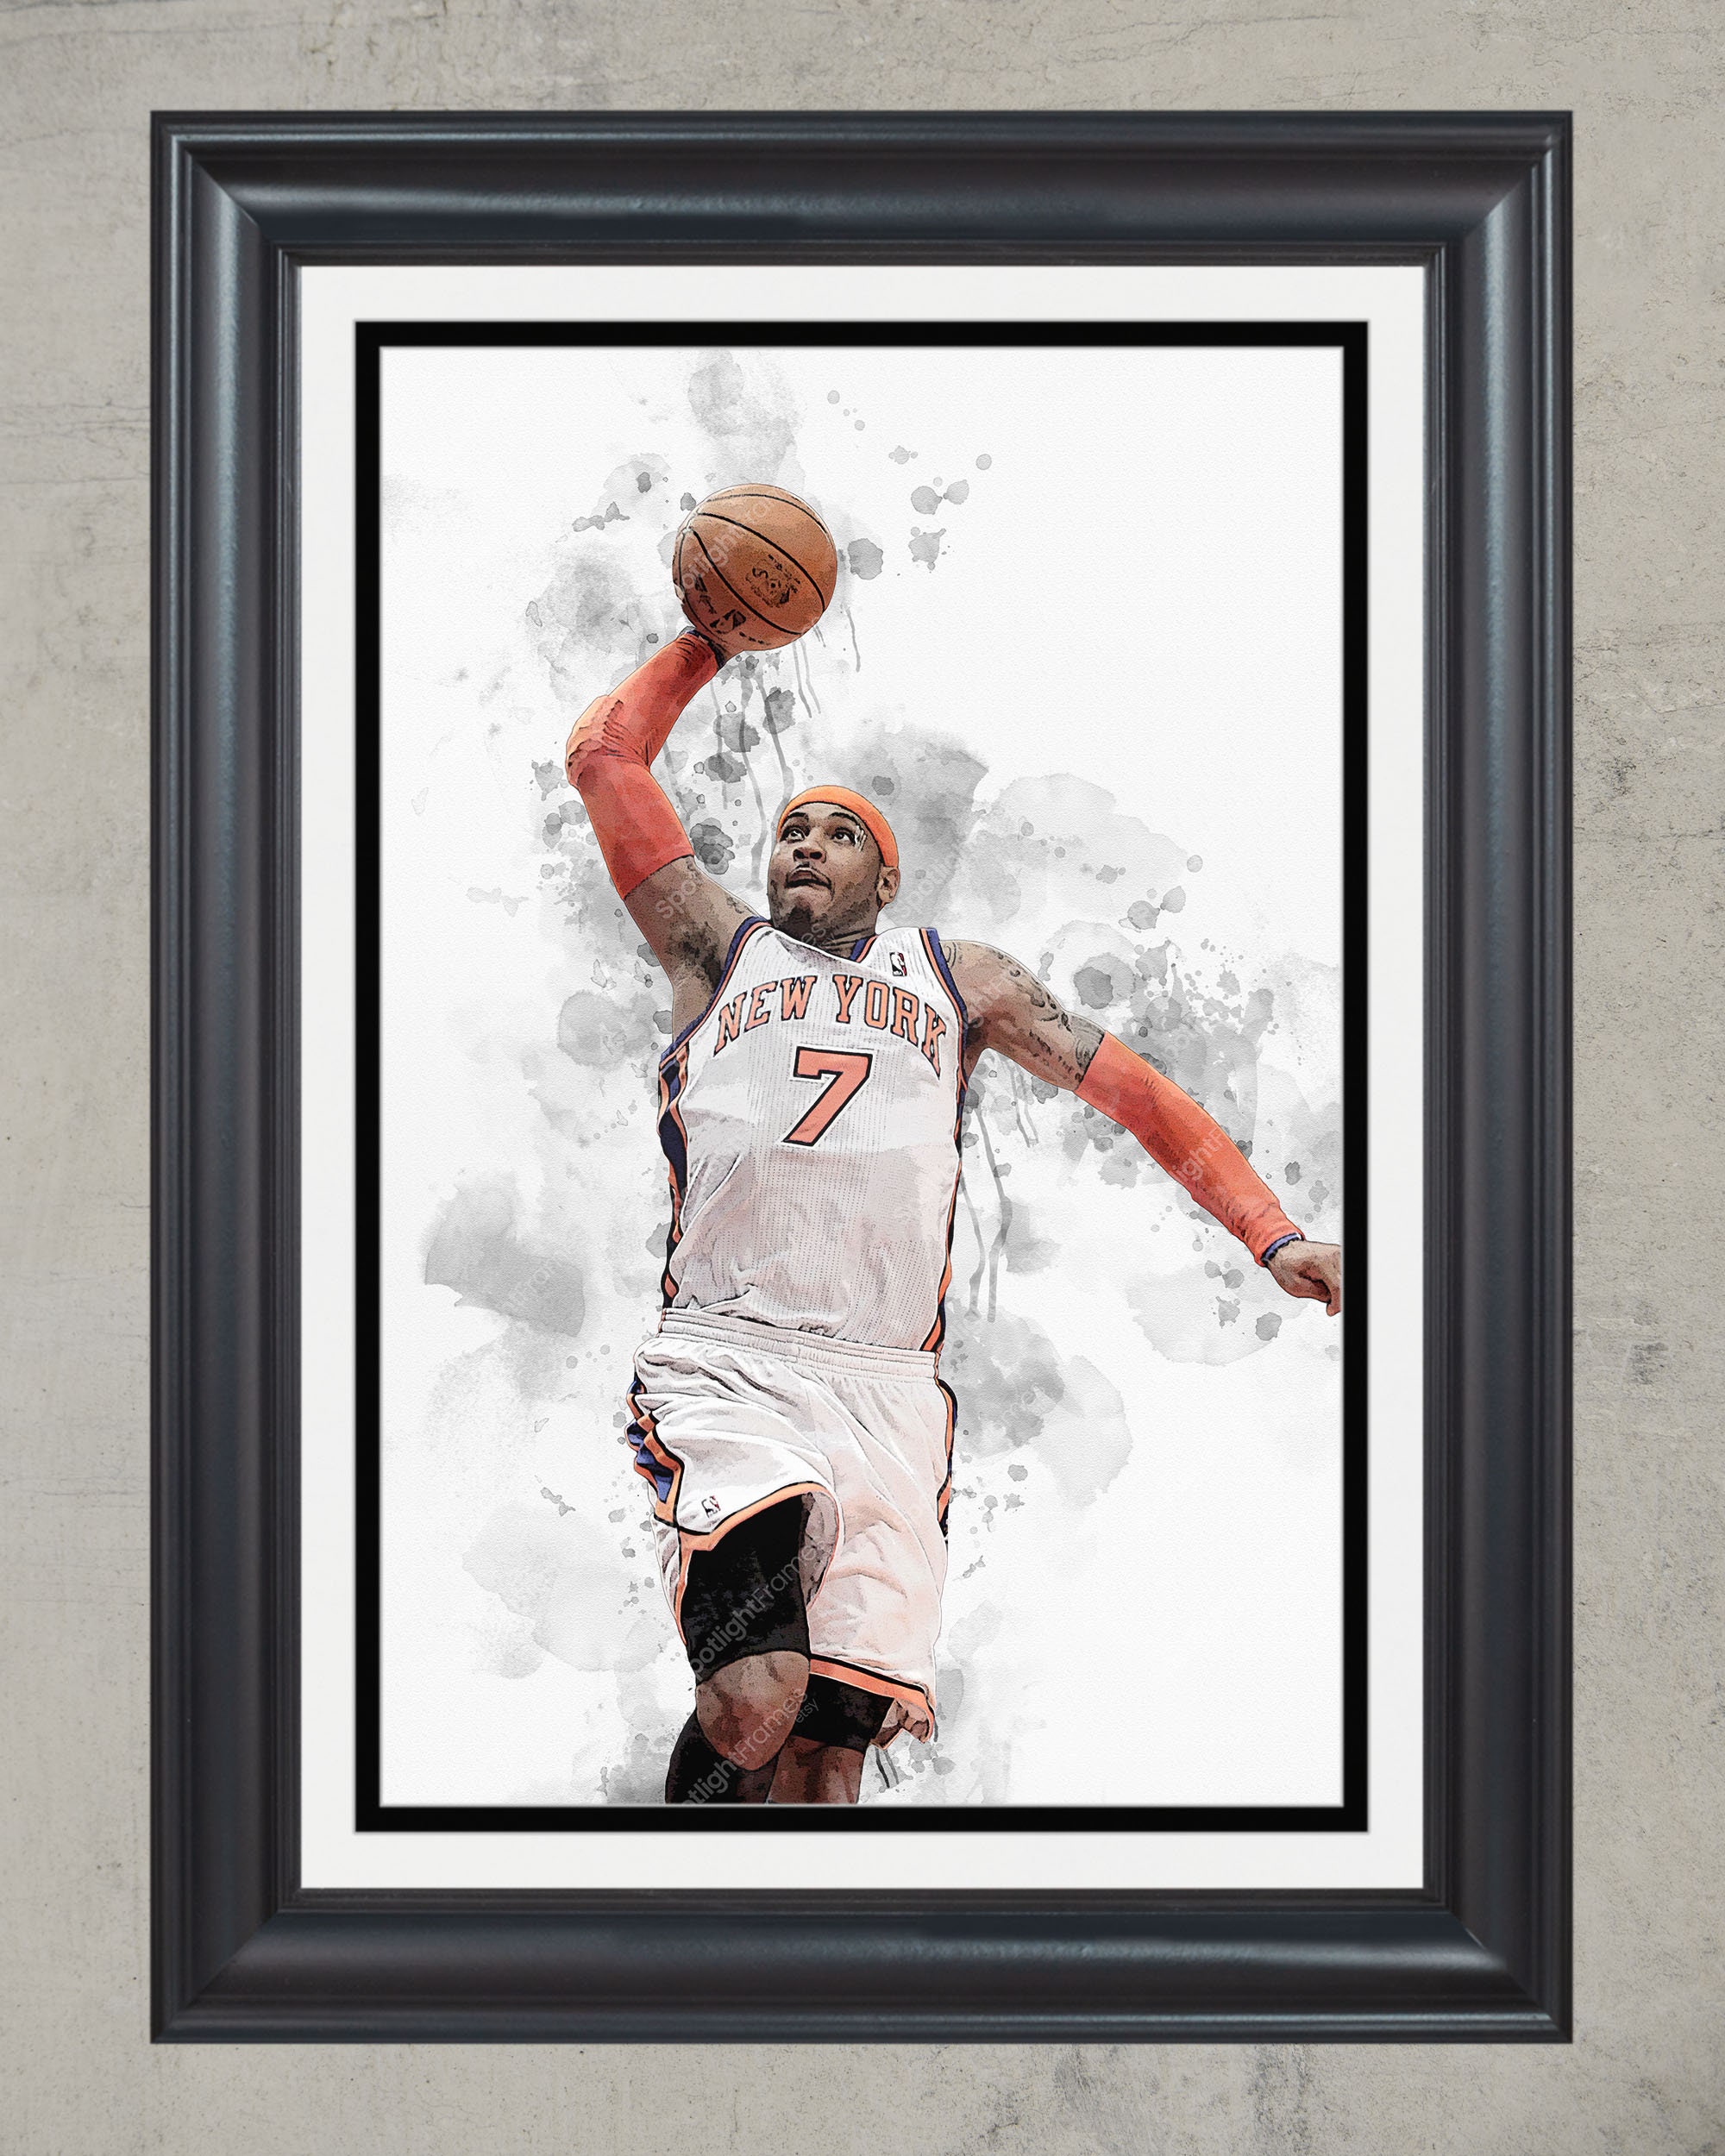  Carmelo Anthony Posters Basketball Wallpaper Canvas Bedroom  Wall Art Decor Picture Print Offices Dorm Room Decor Gifts  Frame:12×18inch(30×45cm) : Tools & Home Improvement